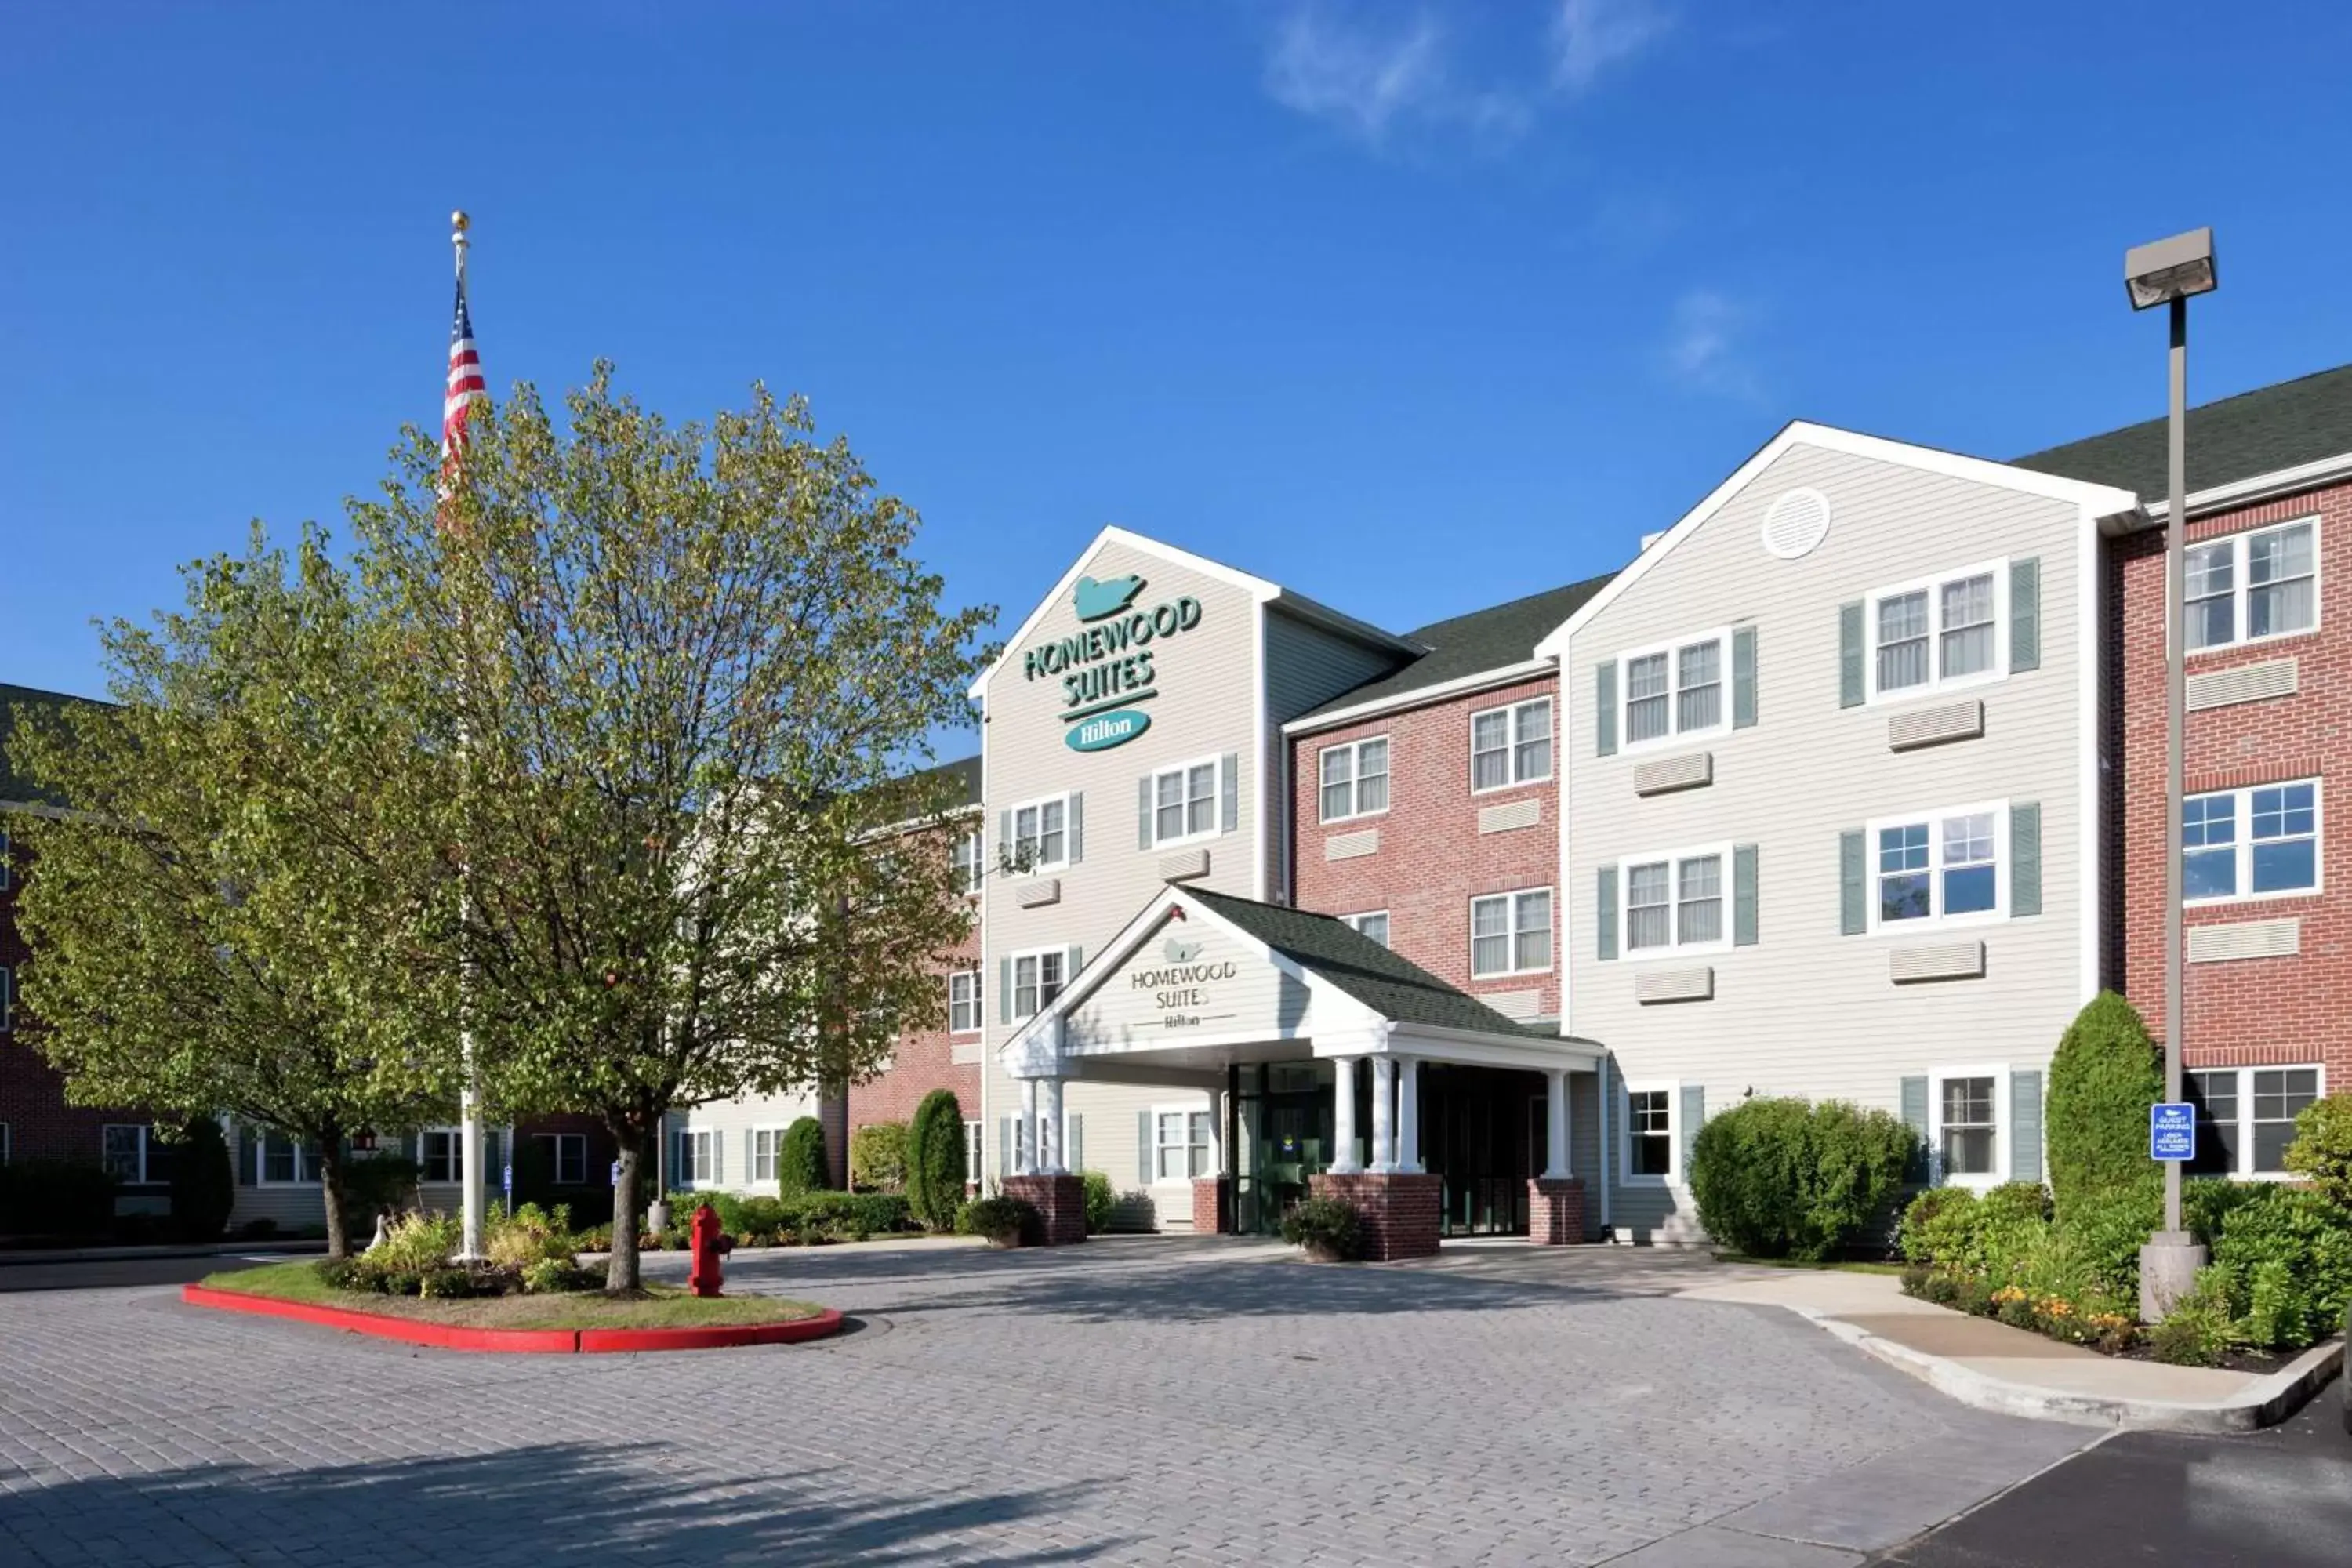 Property Building in Homewood Suites by Hilton Boston/Andover